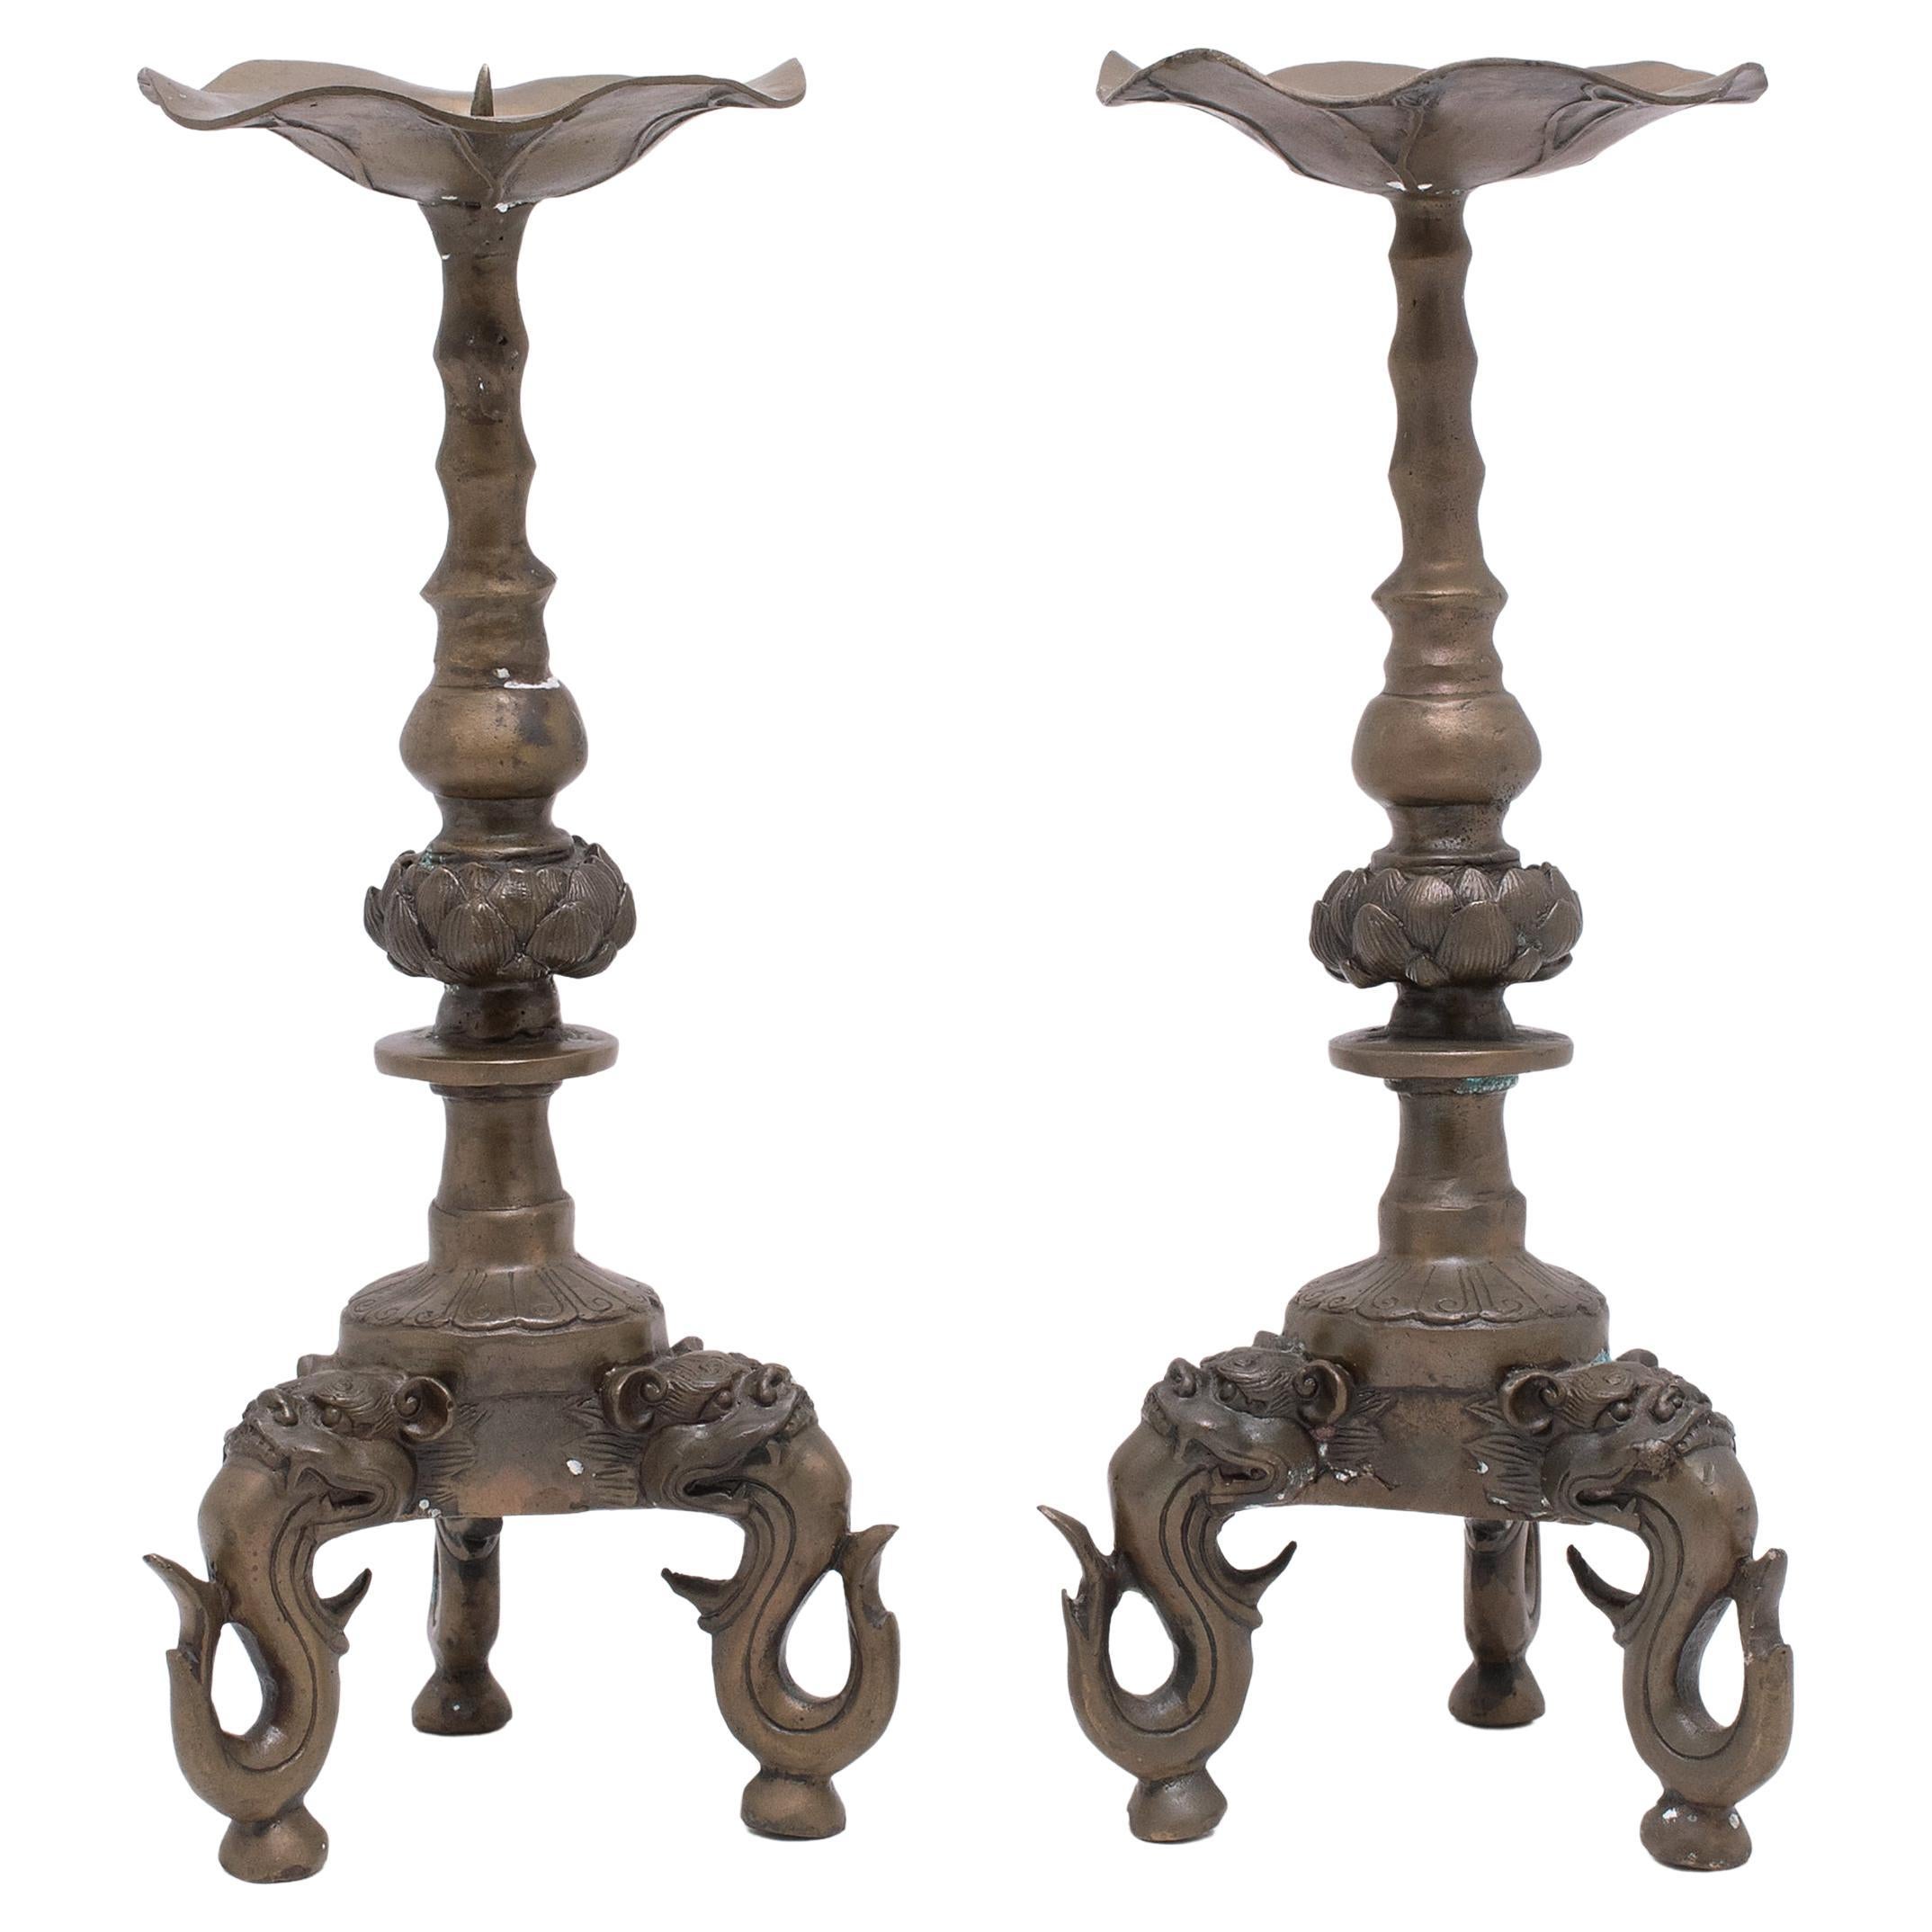 Pair of Chinese Brass Lotus Leaf Candle Stands, c. 1900